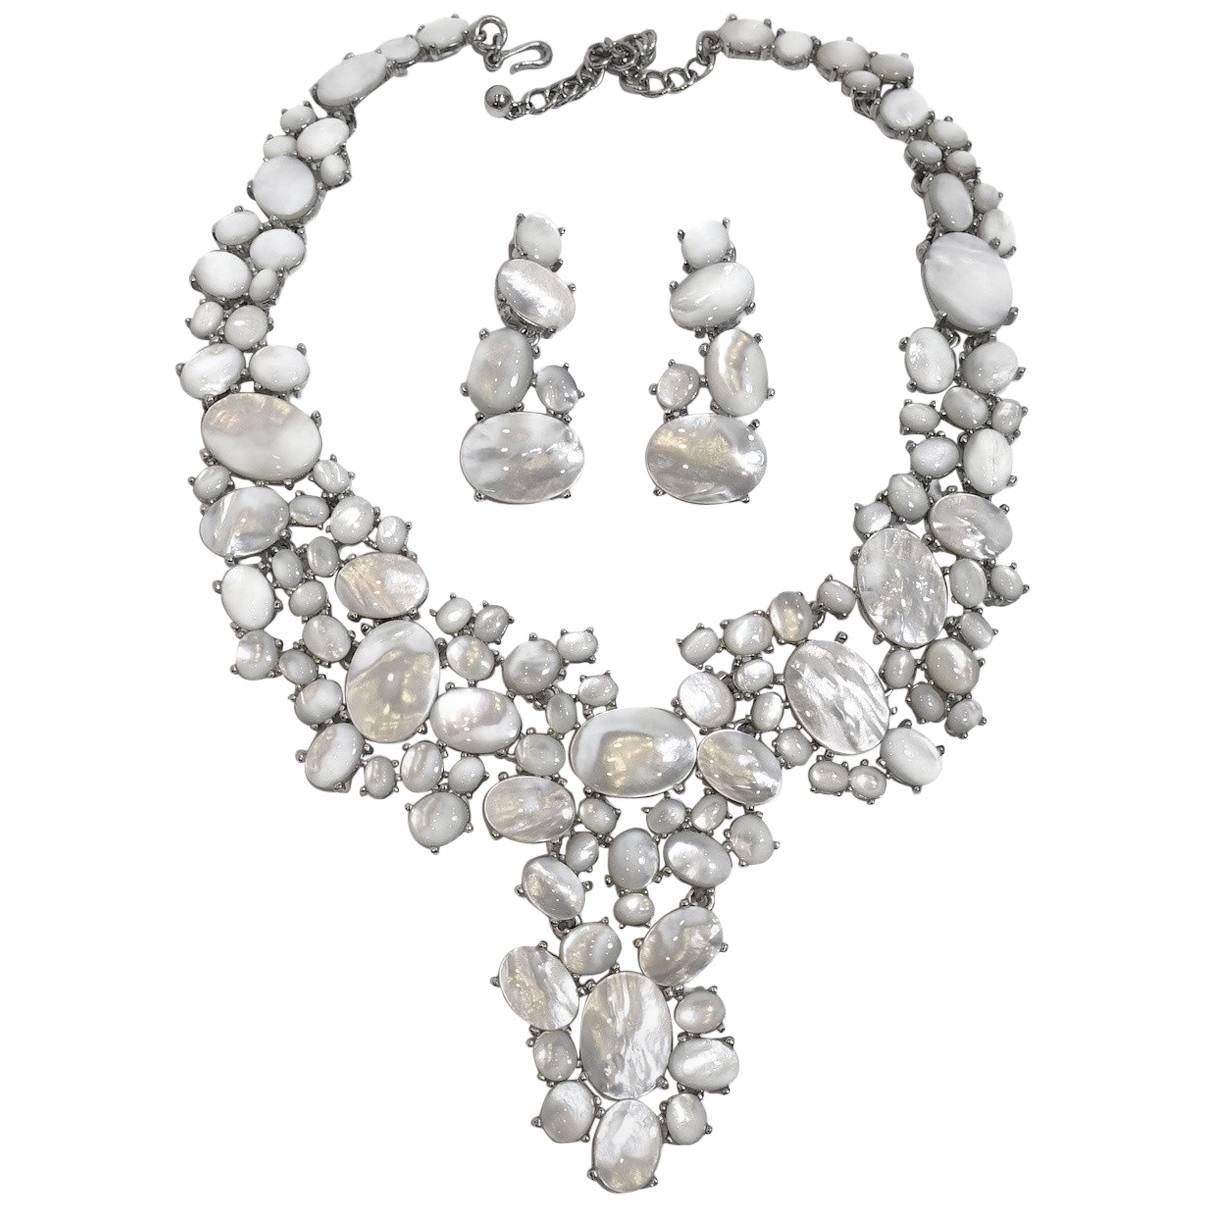 Kenneth Jay Lane Mother-of-Pearl Bib Necklace and Drop Earrings